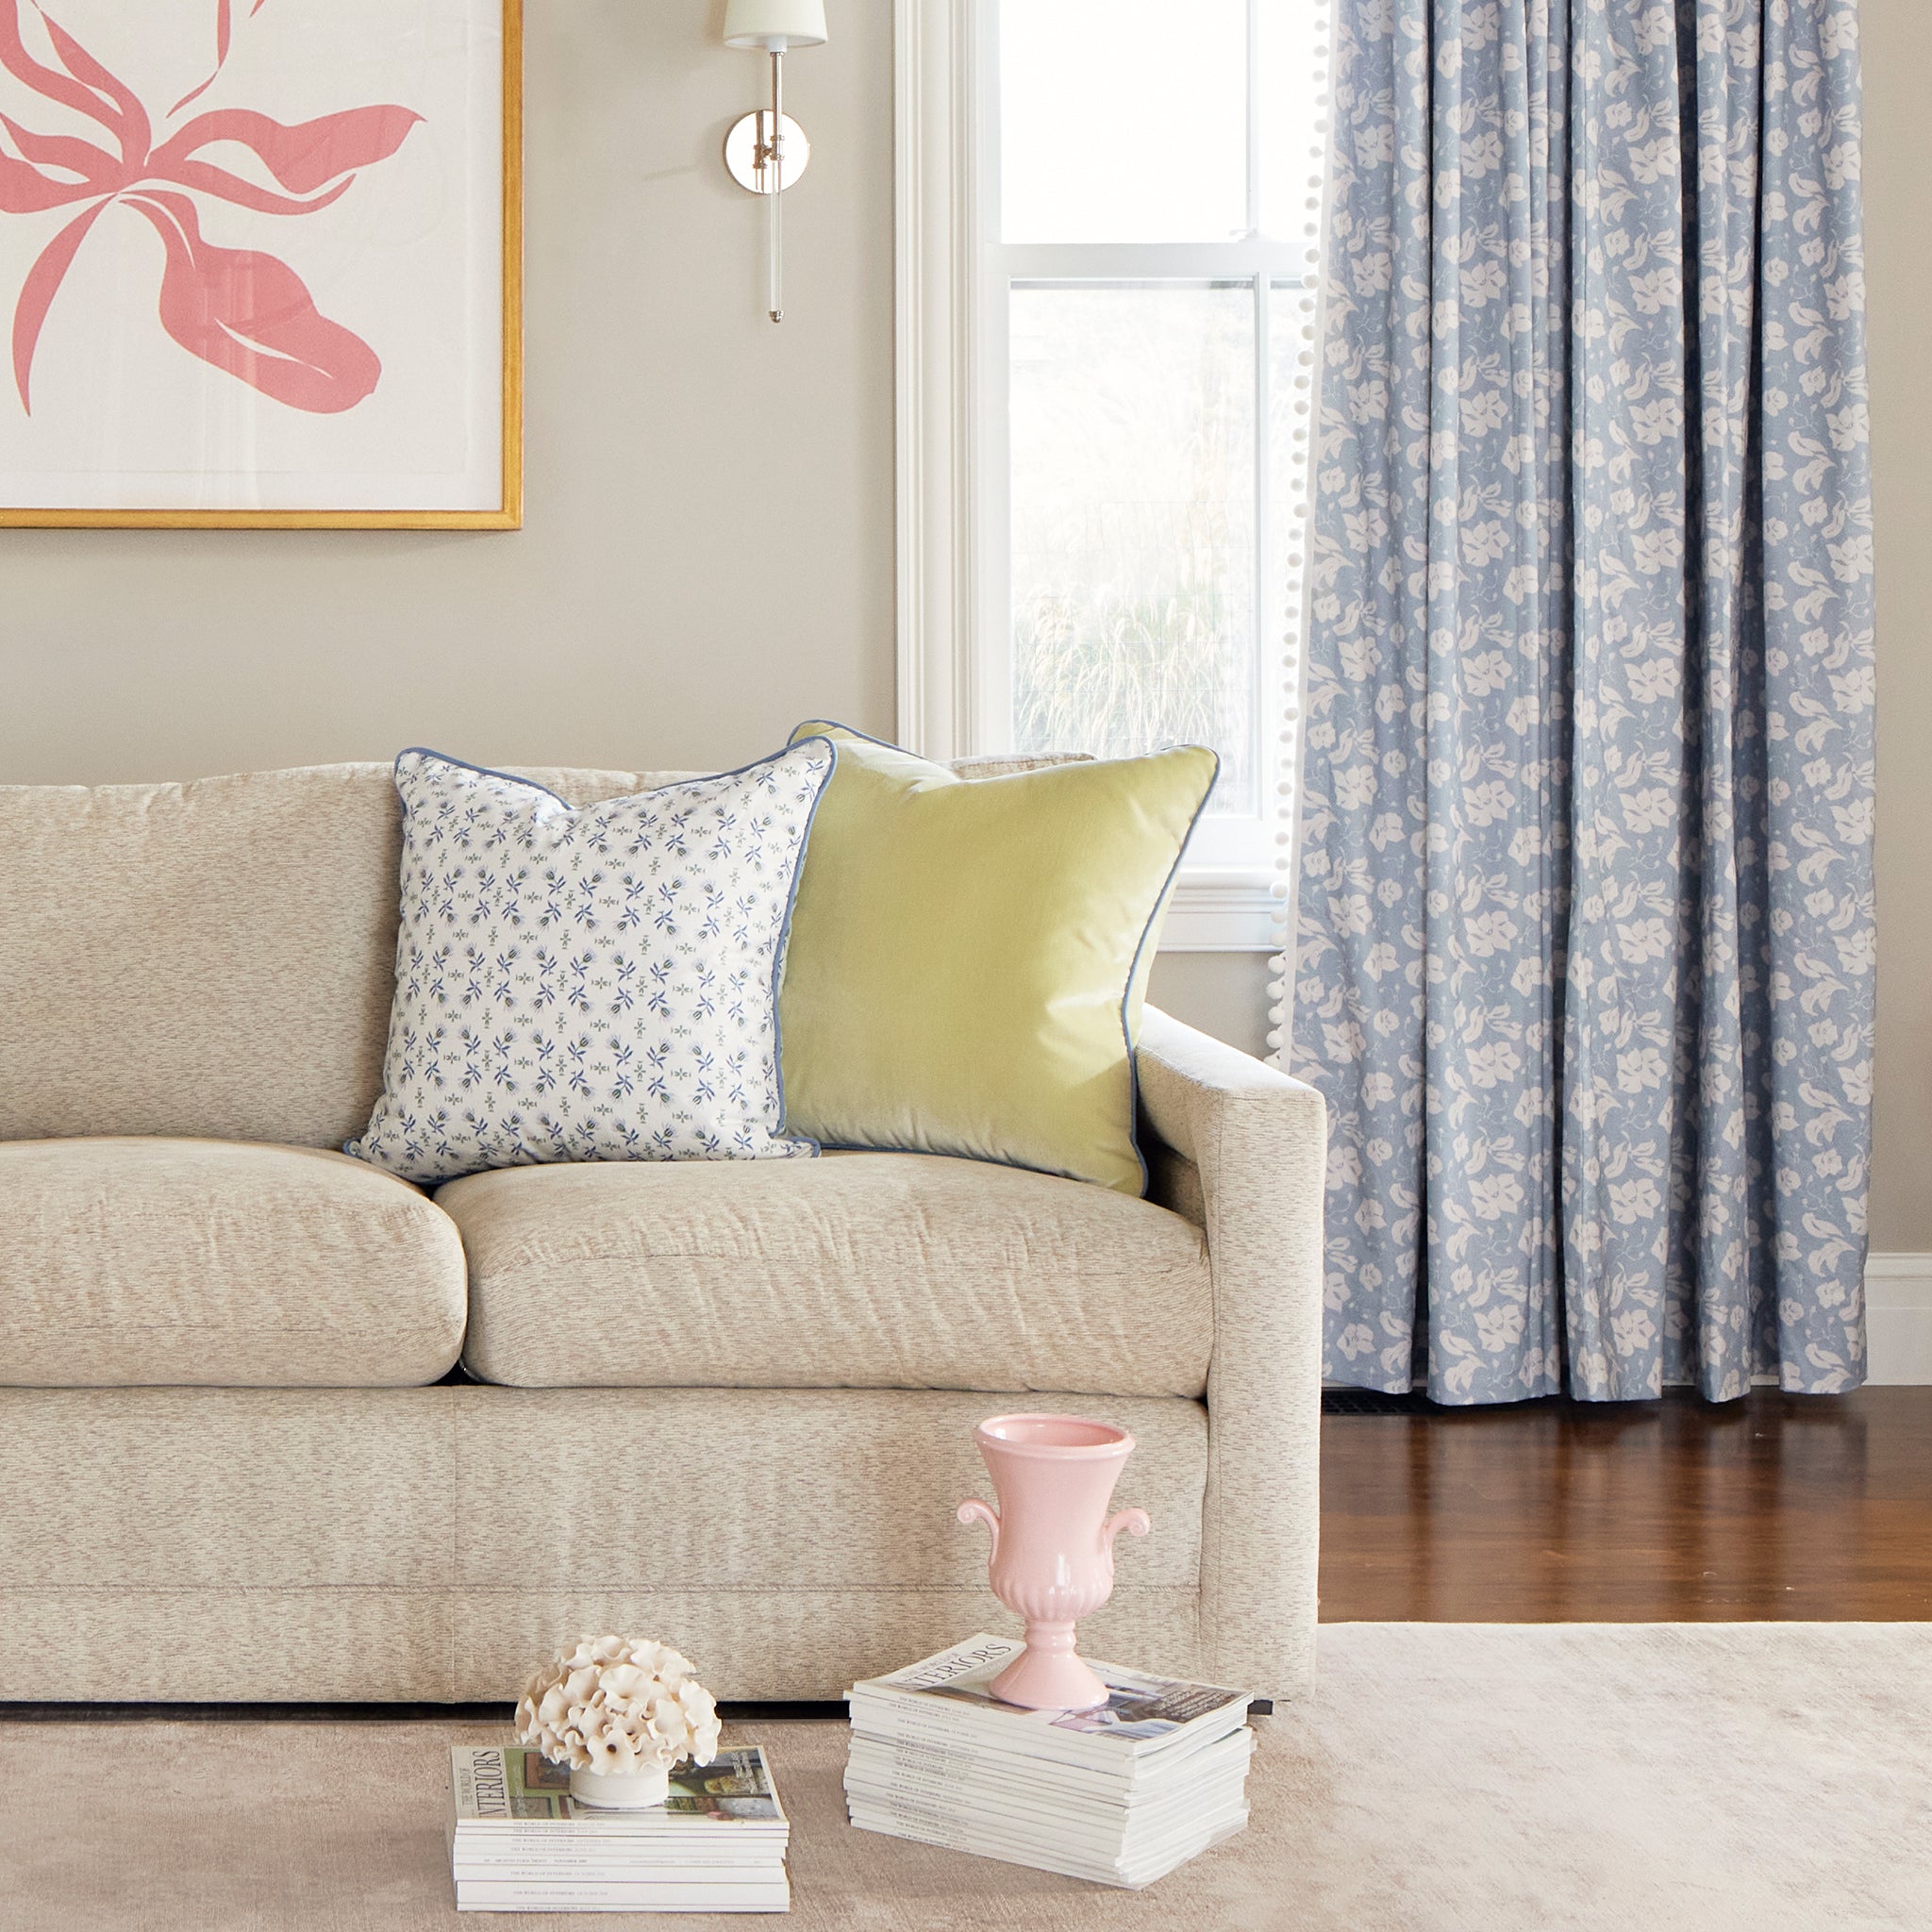 Living room corner styled with Cornflower Blue Floral Printed Curtains with White Pom Poms and cream couch with Blue & Green Floral Printed Pillow and Light Green Pillow behind two stacks of magazines with two pink decorations on top